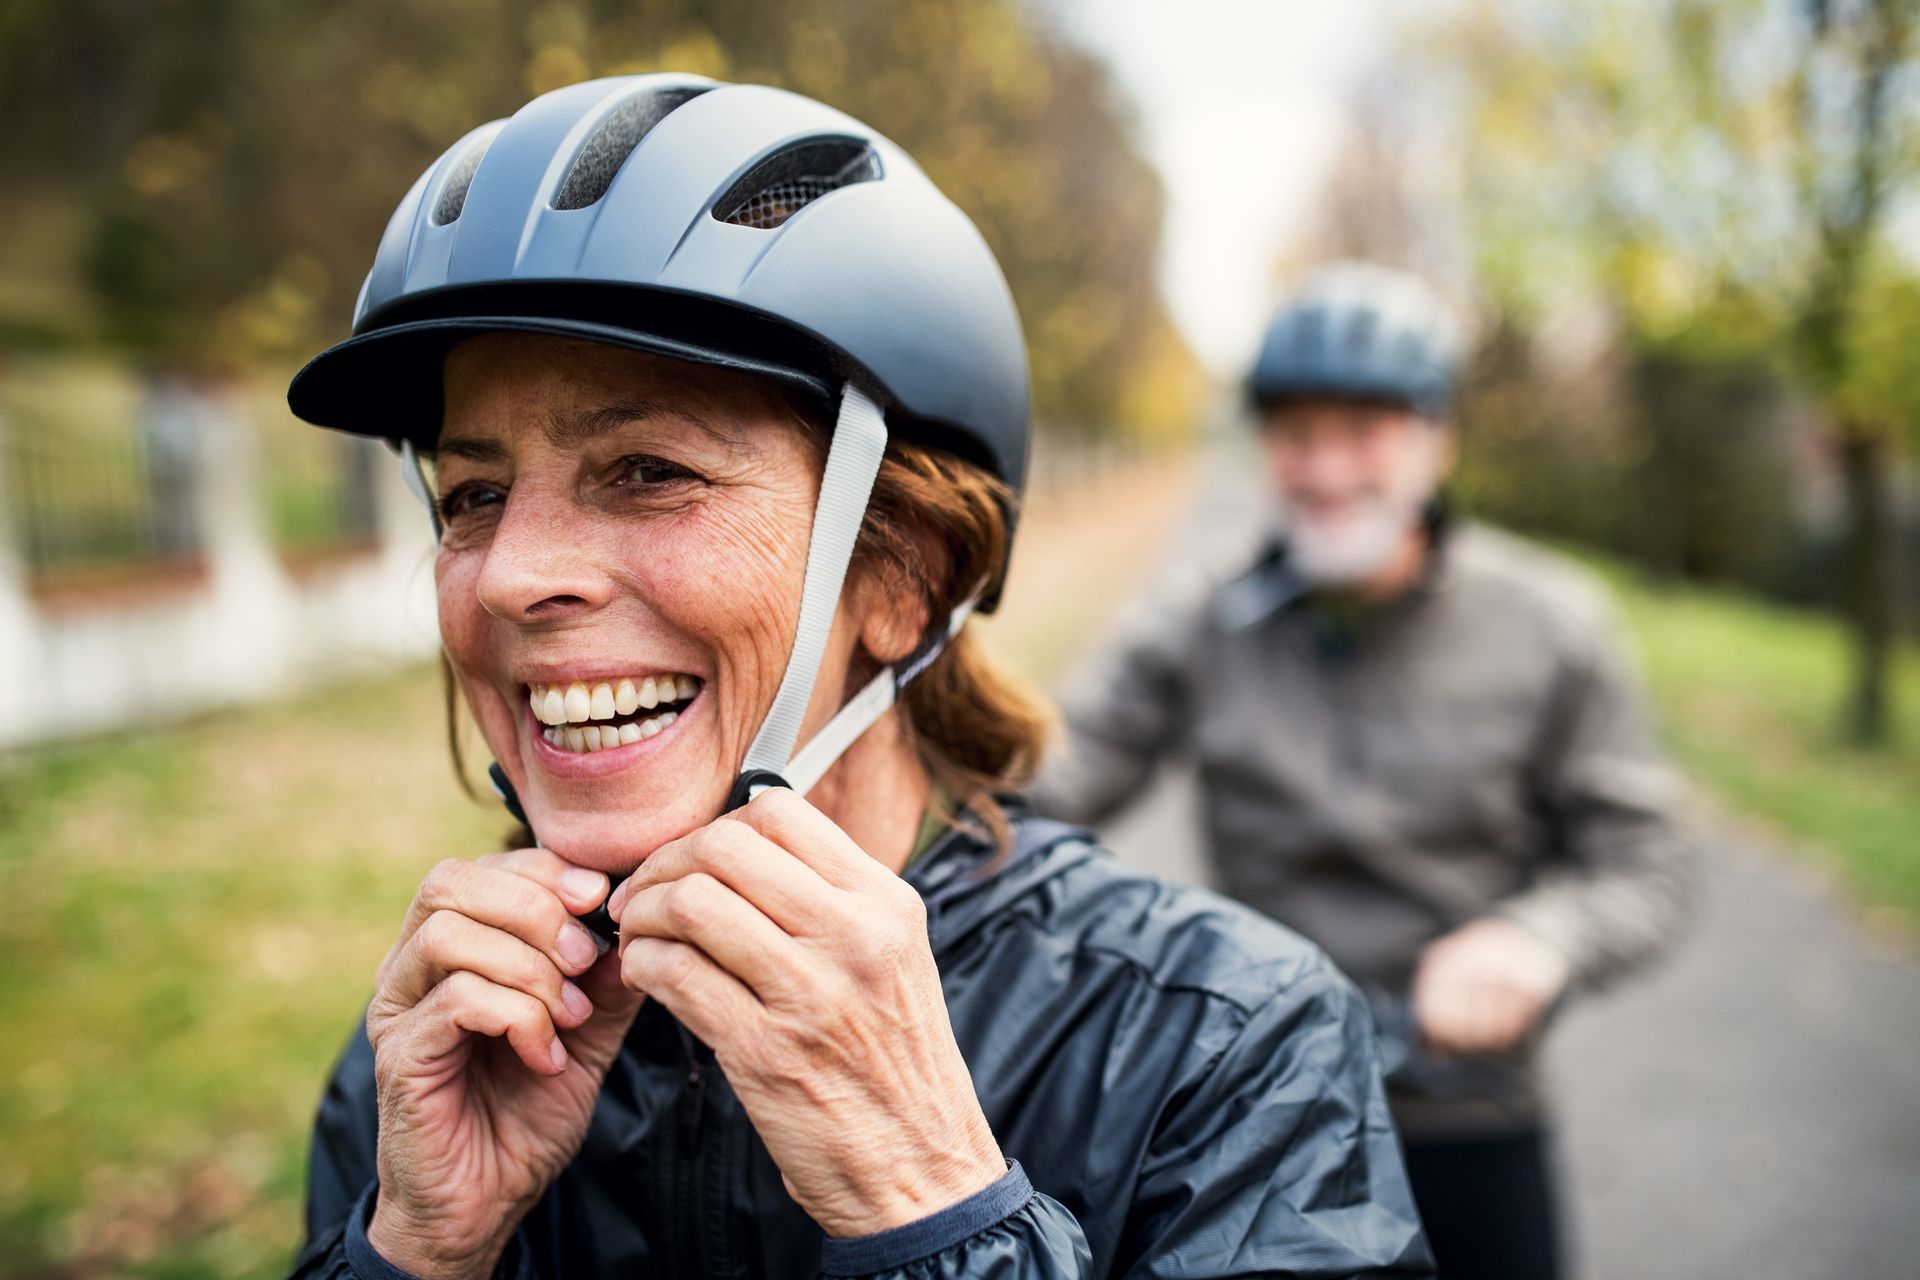 Woman strapping on a bicycle helmet with man on a bike behind her wearing a helmet.